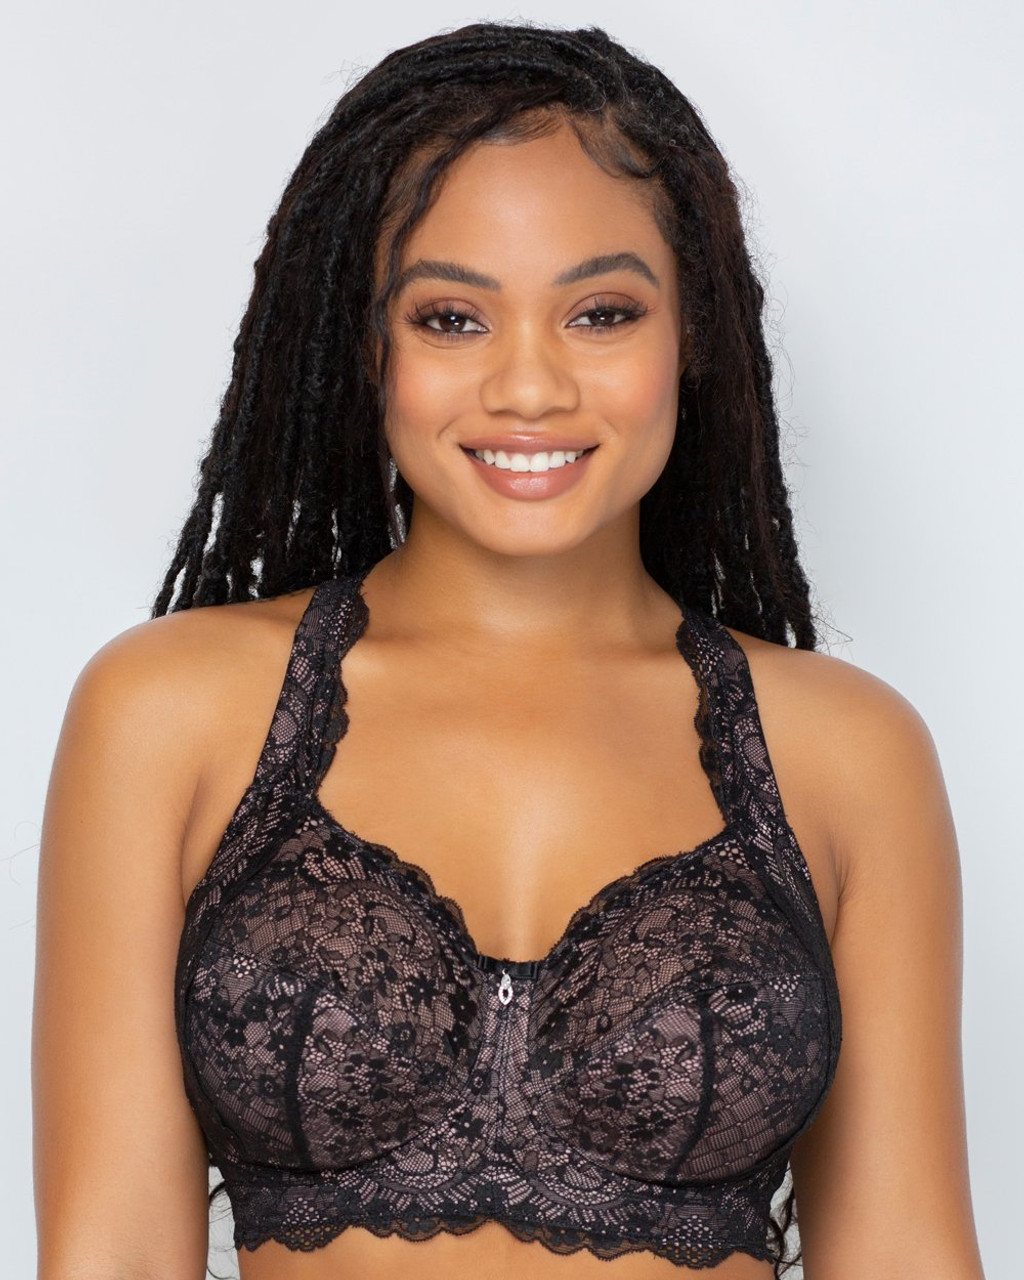 38DDD Bras by Curvy Couture